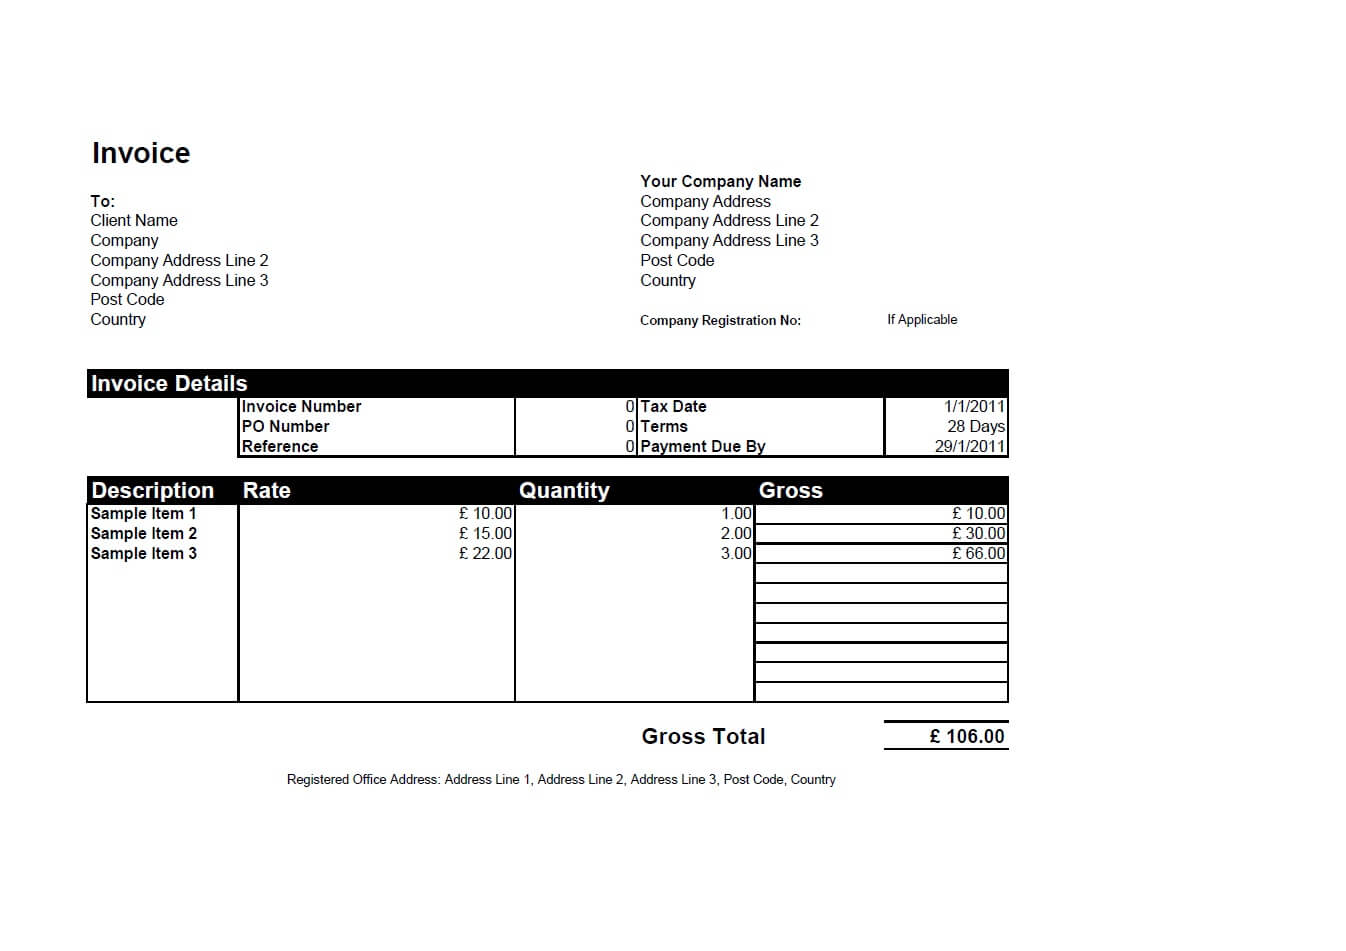 Free Invoice Template using Excel Download today Create, print 